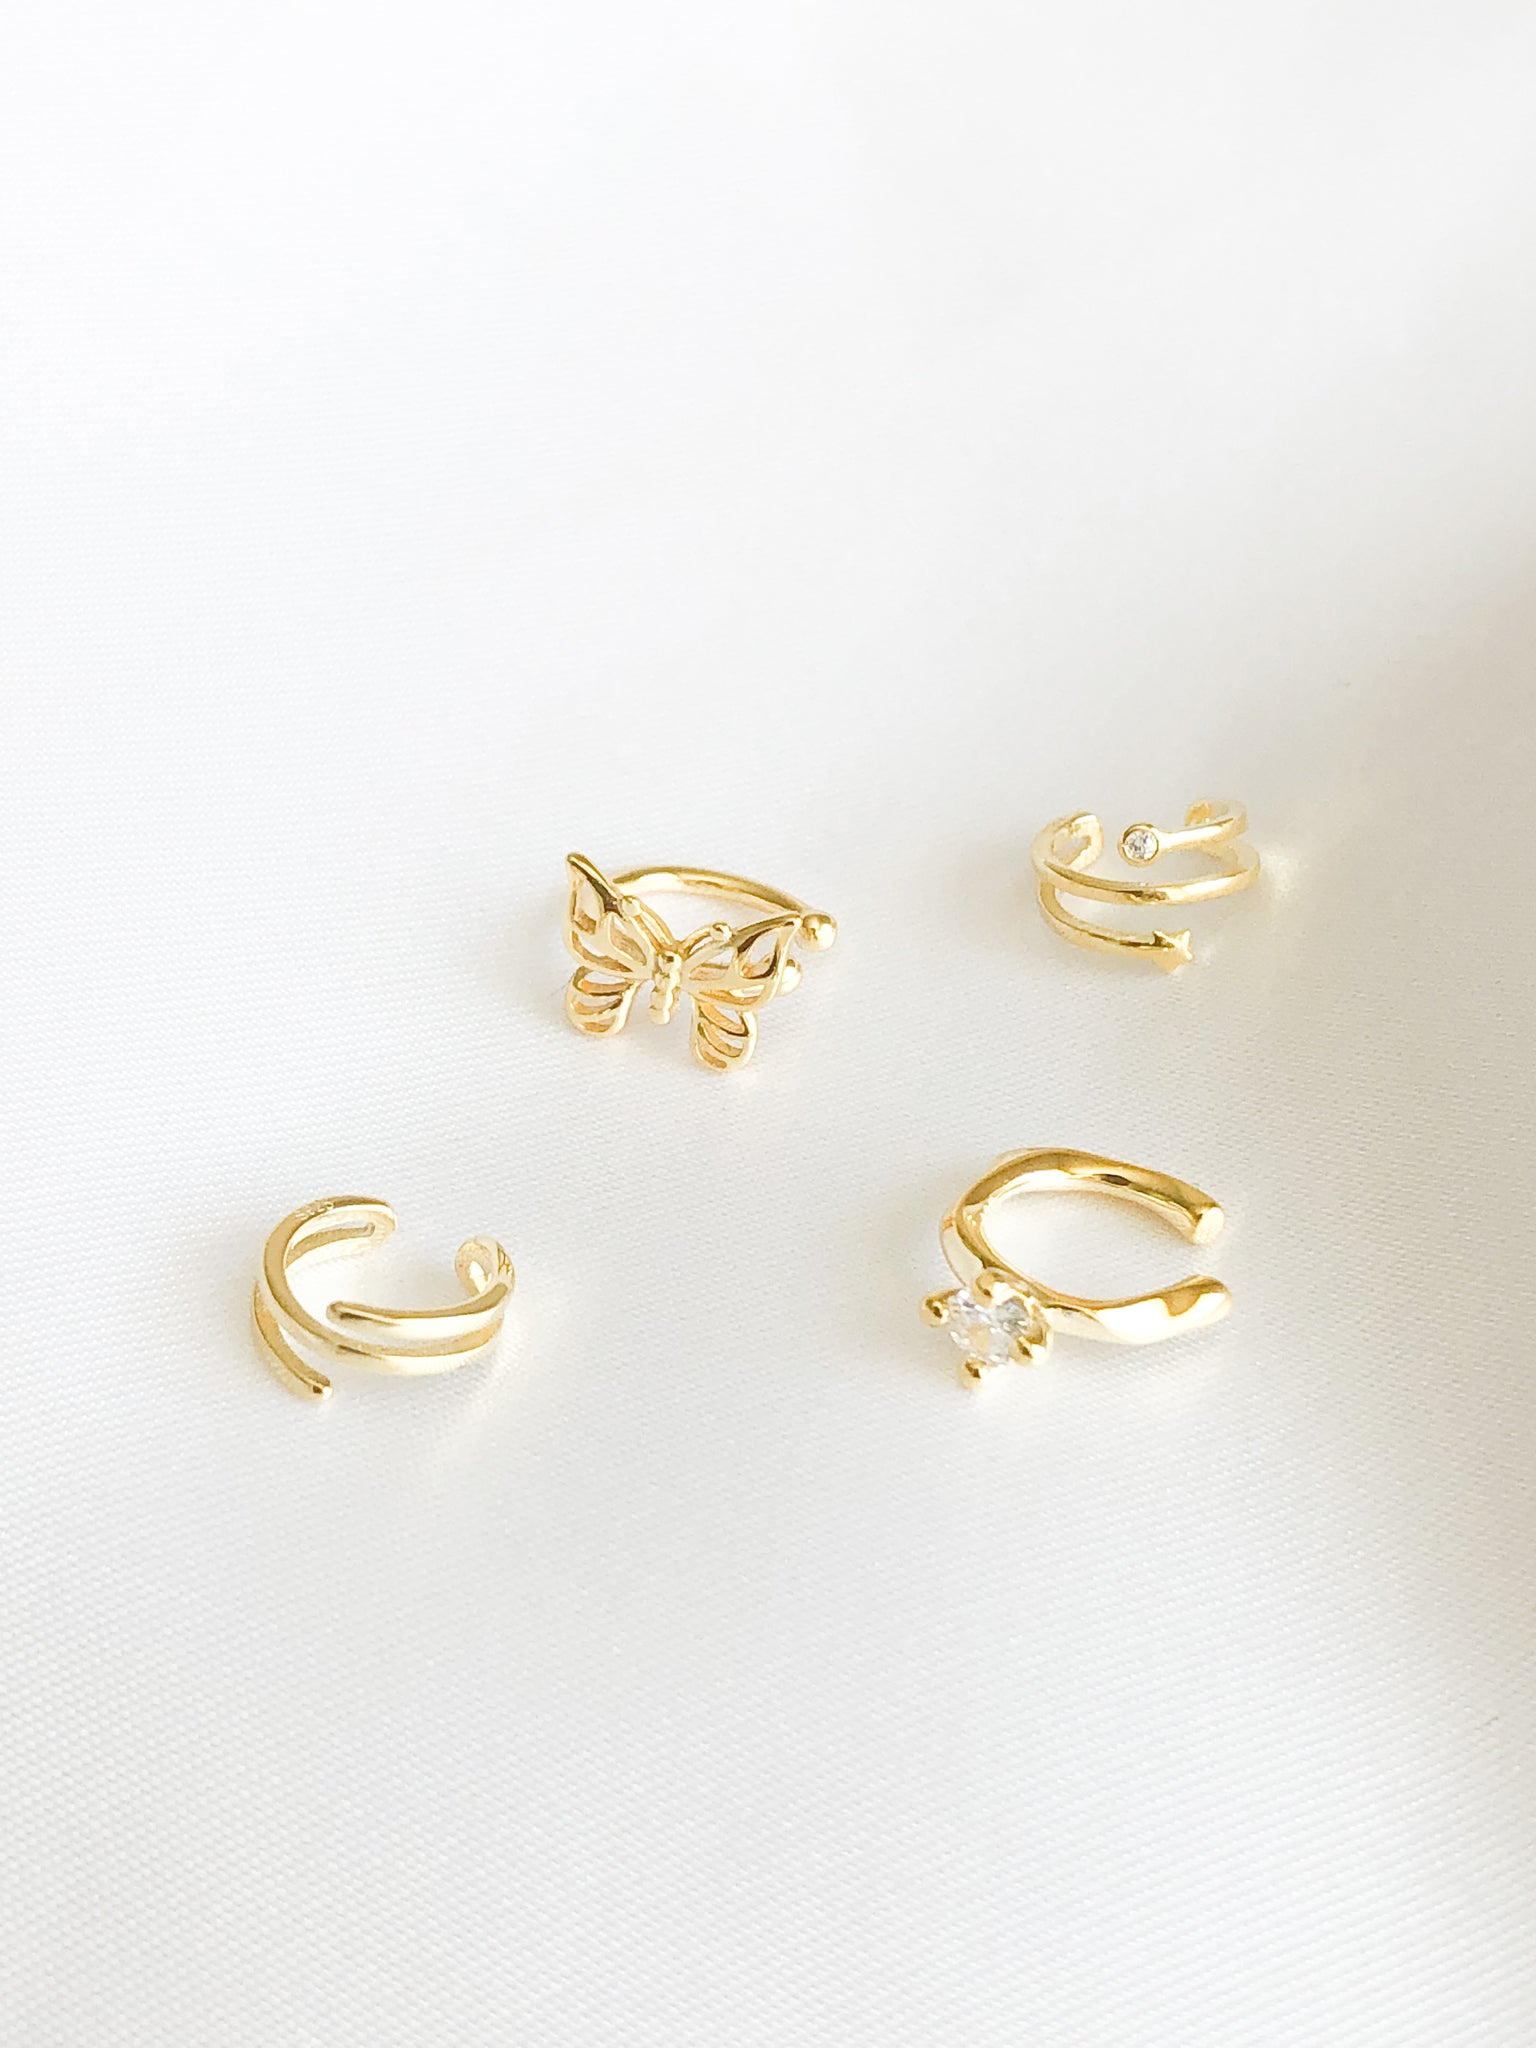 Upgrade your jewelry game with our stunning bundle of gold ear cuffs, featuring a gold butterfly ear cuff, a gold 3 banded layered ear cuff, a gold 3 banded layered ear cuff with star and one gem, and a gold cuff with cubic zirconia gem. All cuffs are designed for a comfortable and secure fit, perfect for those without pierced ears. 